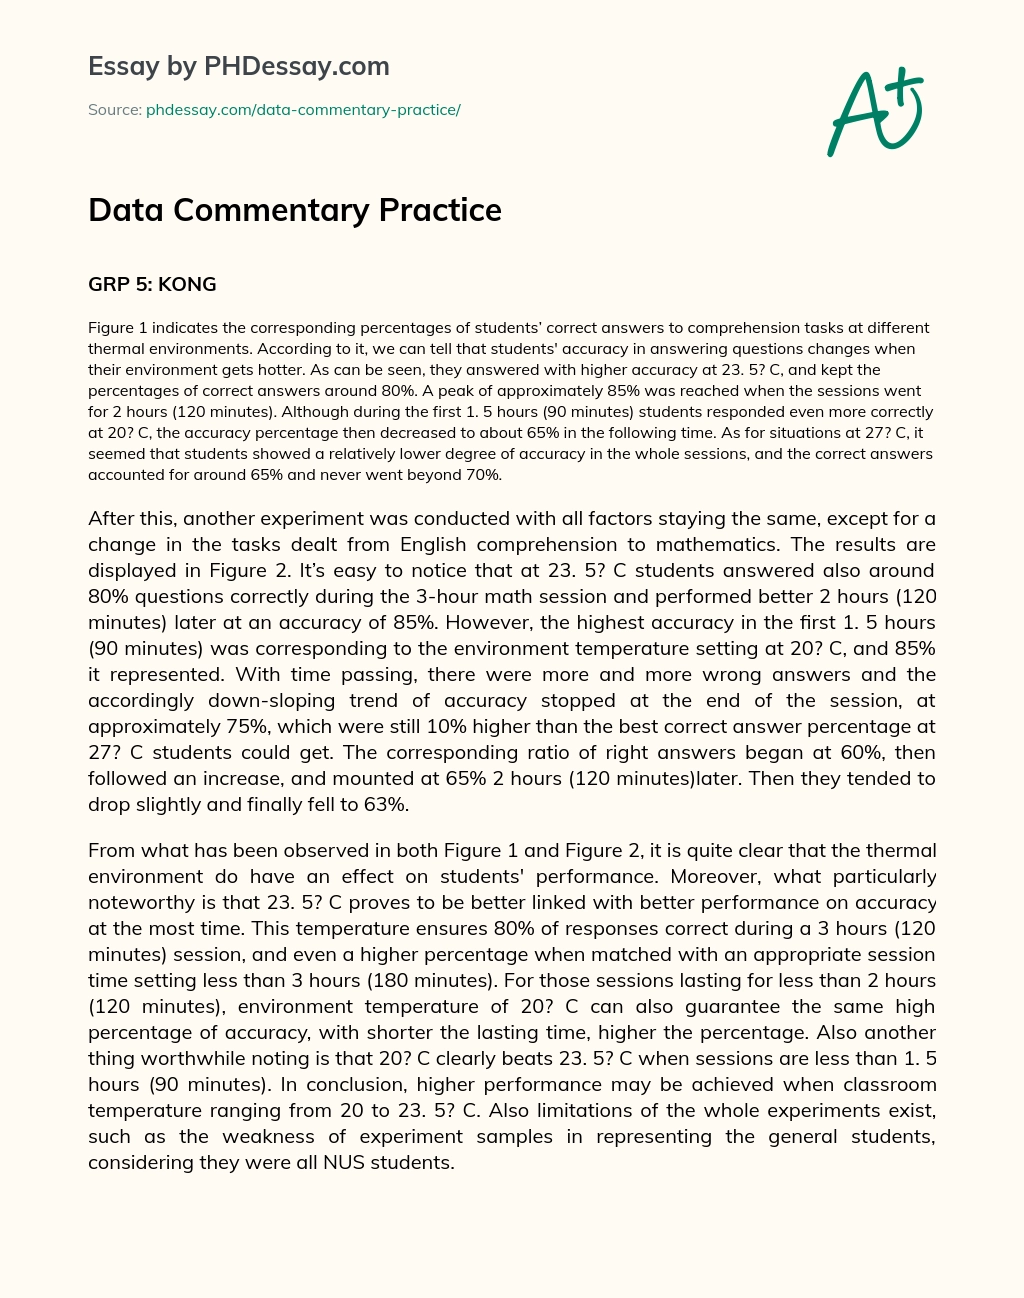 Data Commentary Practice essay